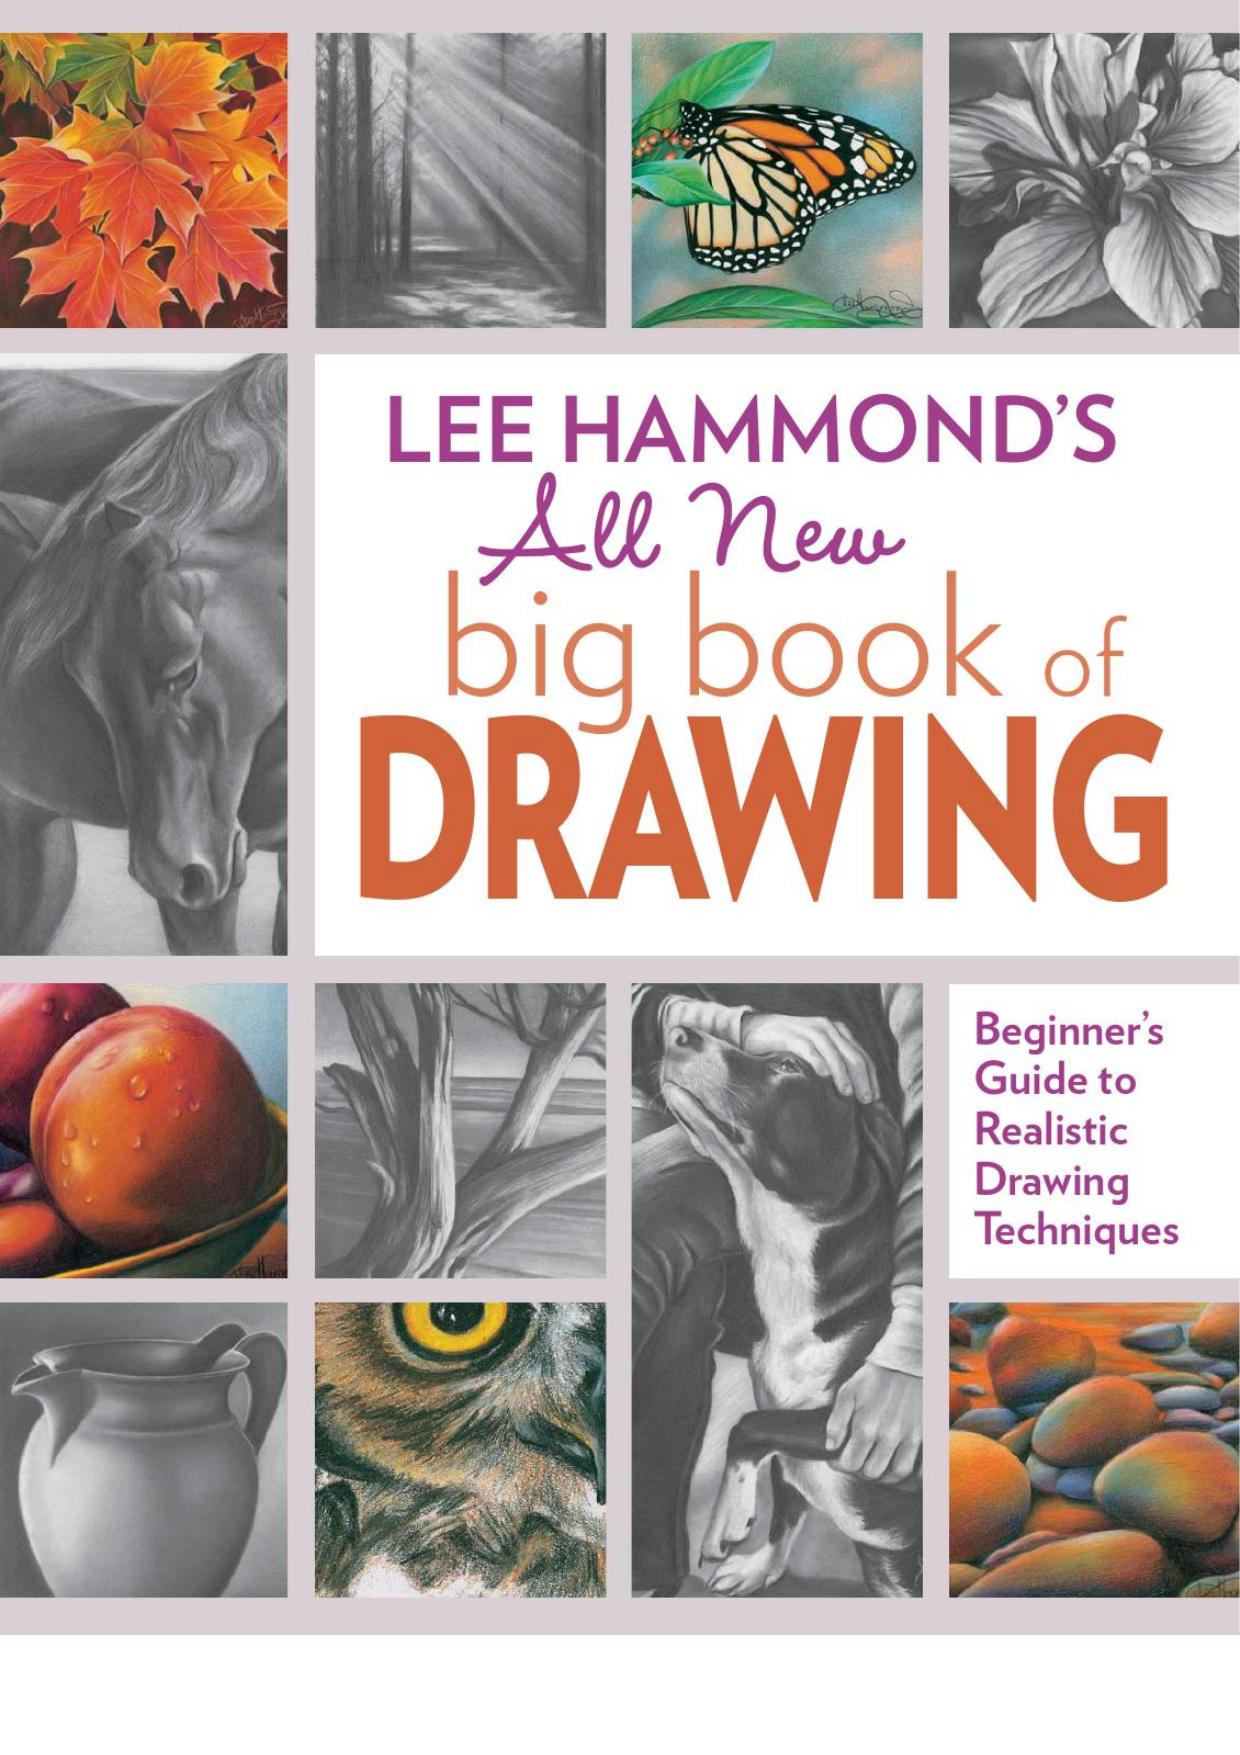 Lee Hammond’s All New Big Book of Drawing Beginner’s Guide to Realistic Drawing Techniques 2017